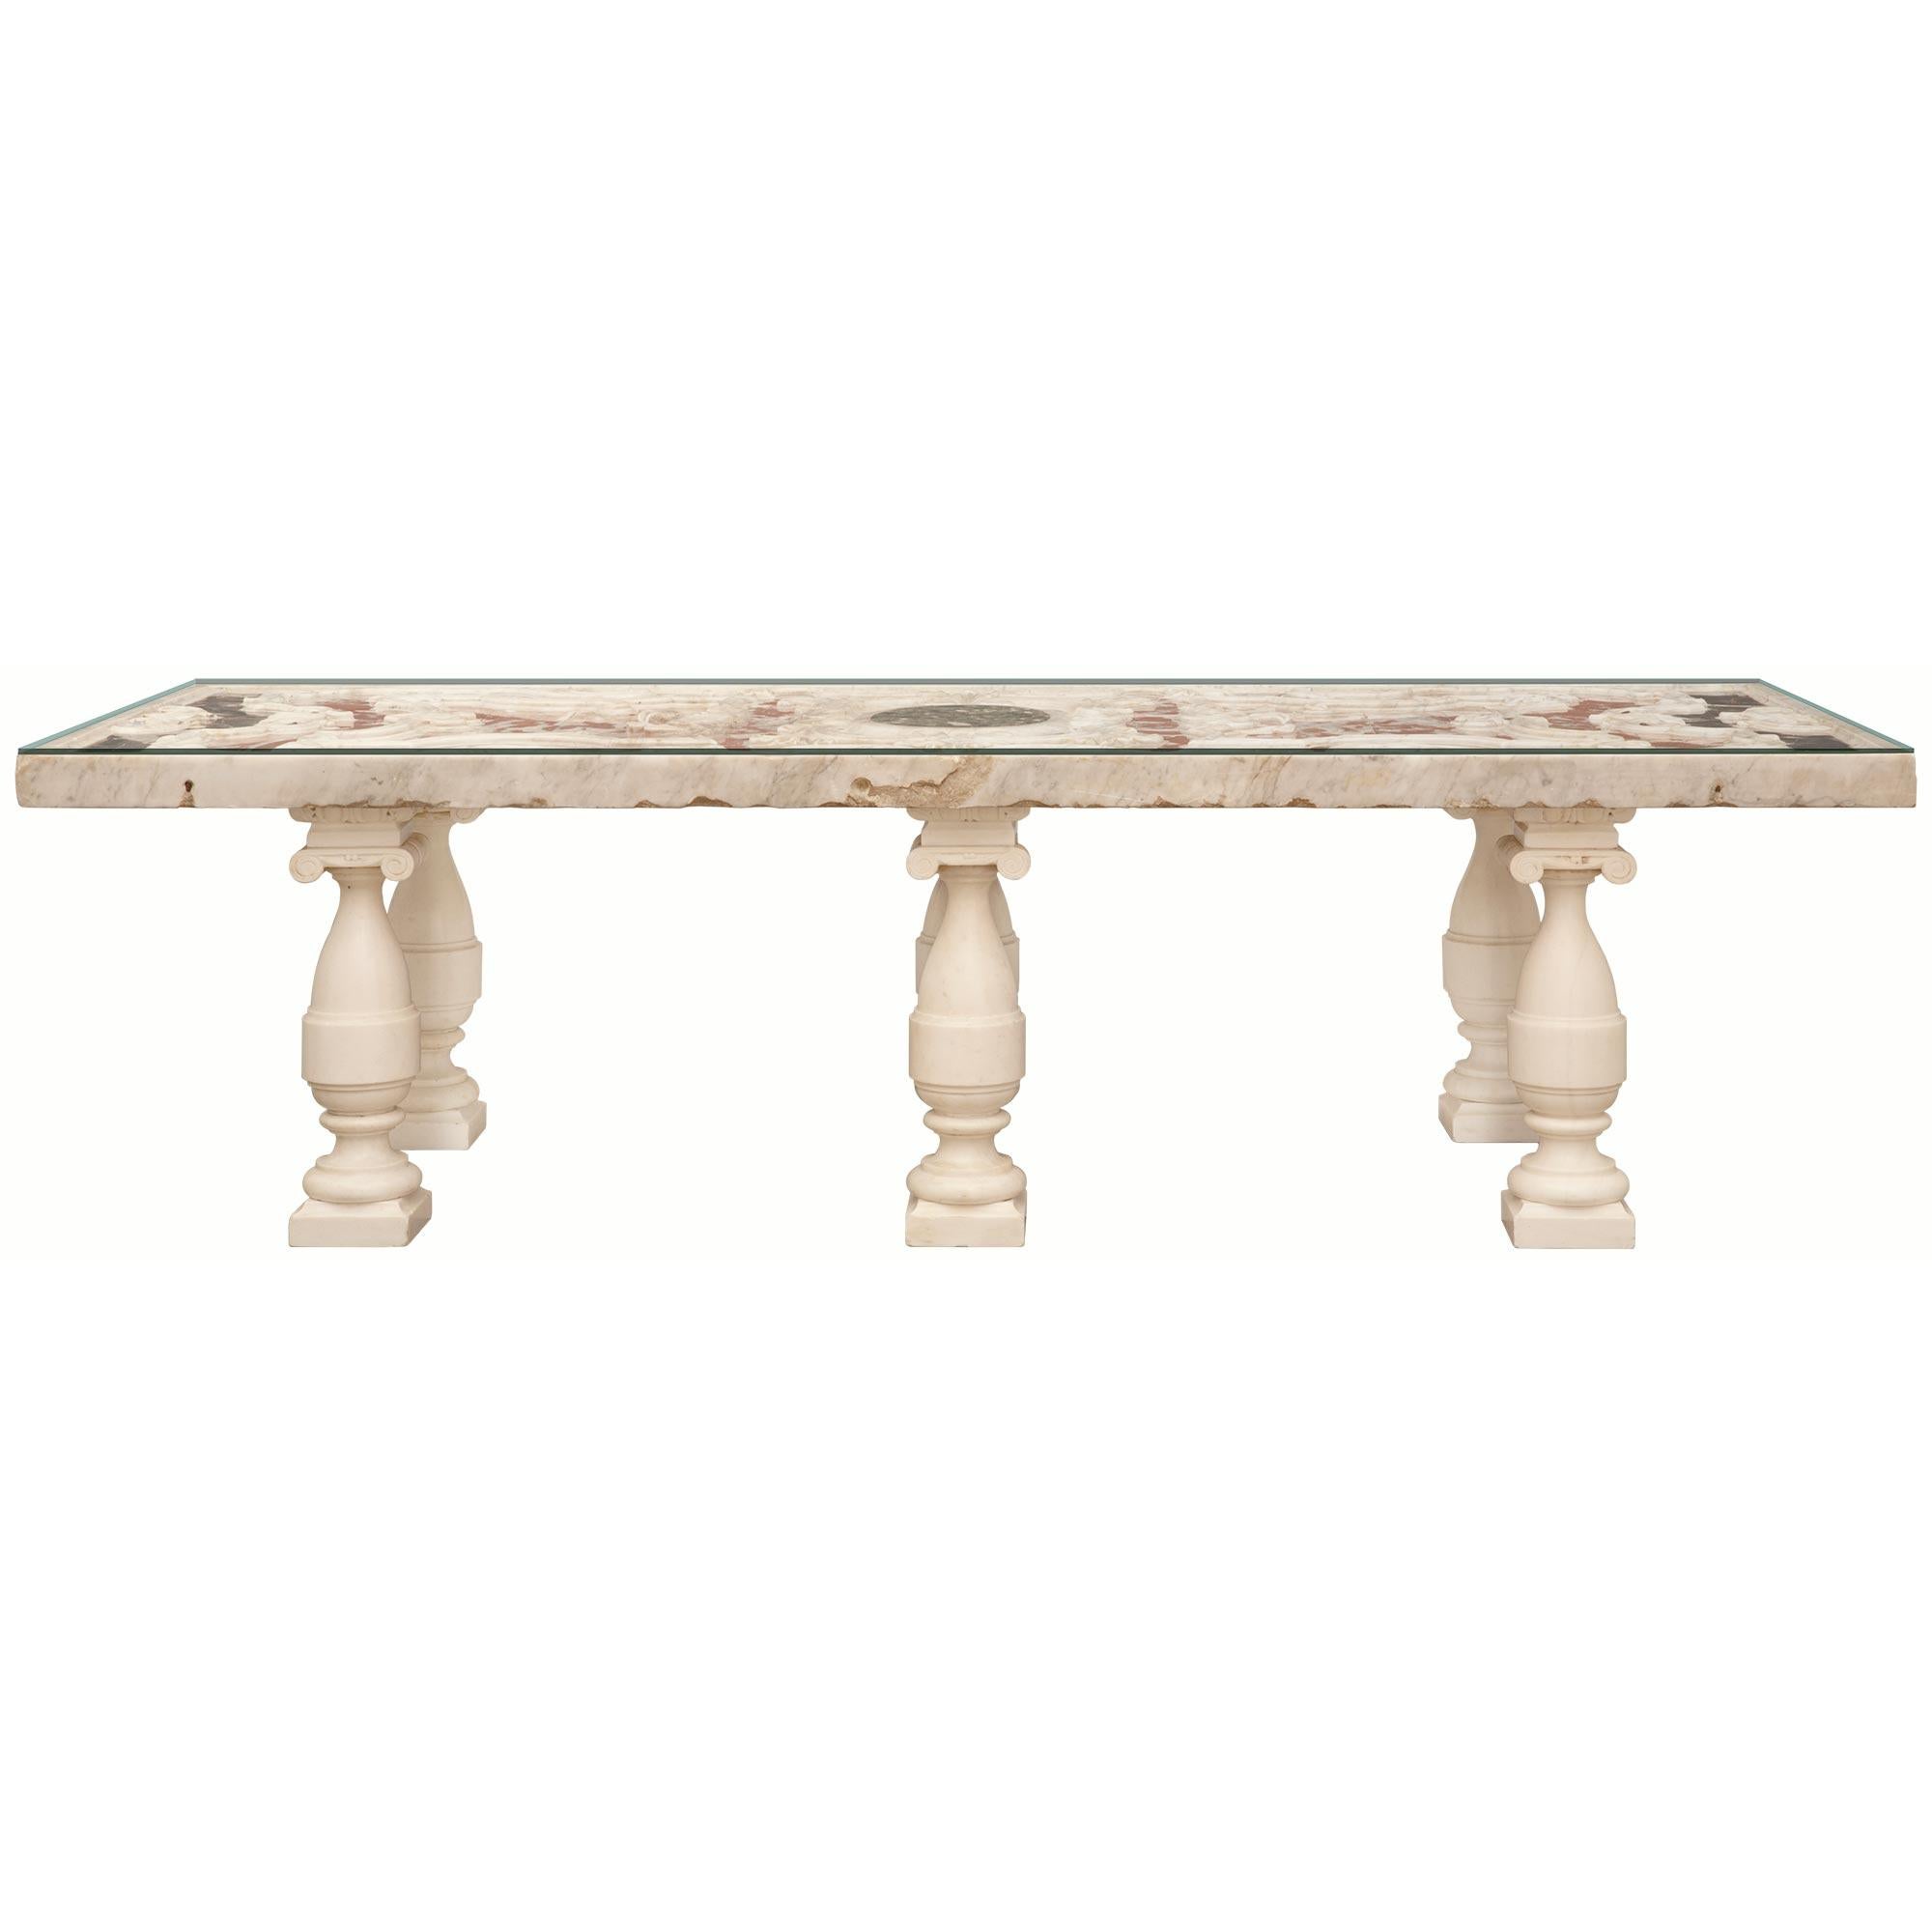 Italian Early 18th Century Louis XIV Period Marble Plateau Coffee Table For Sale 5